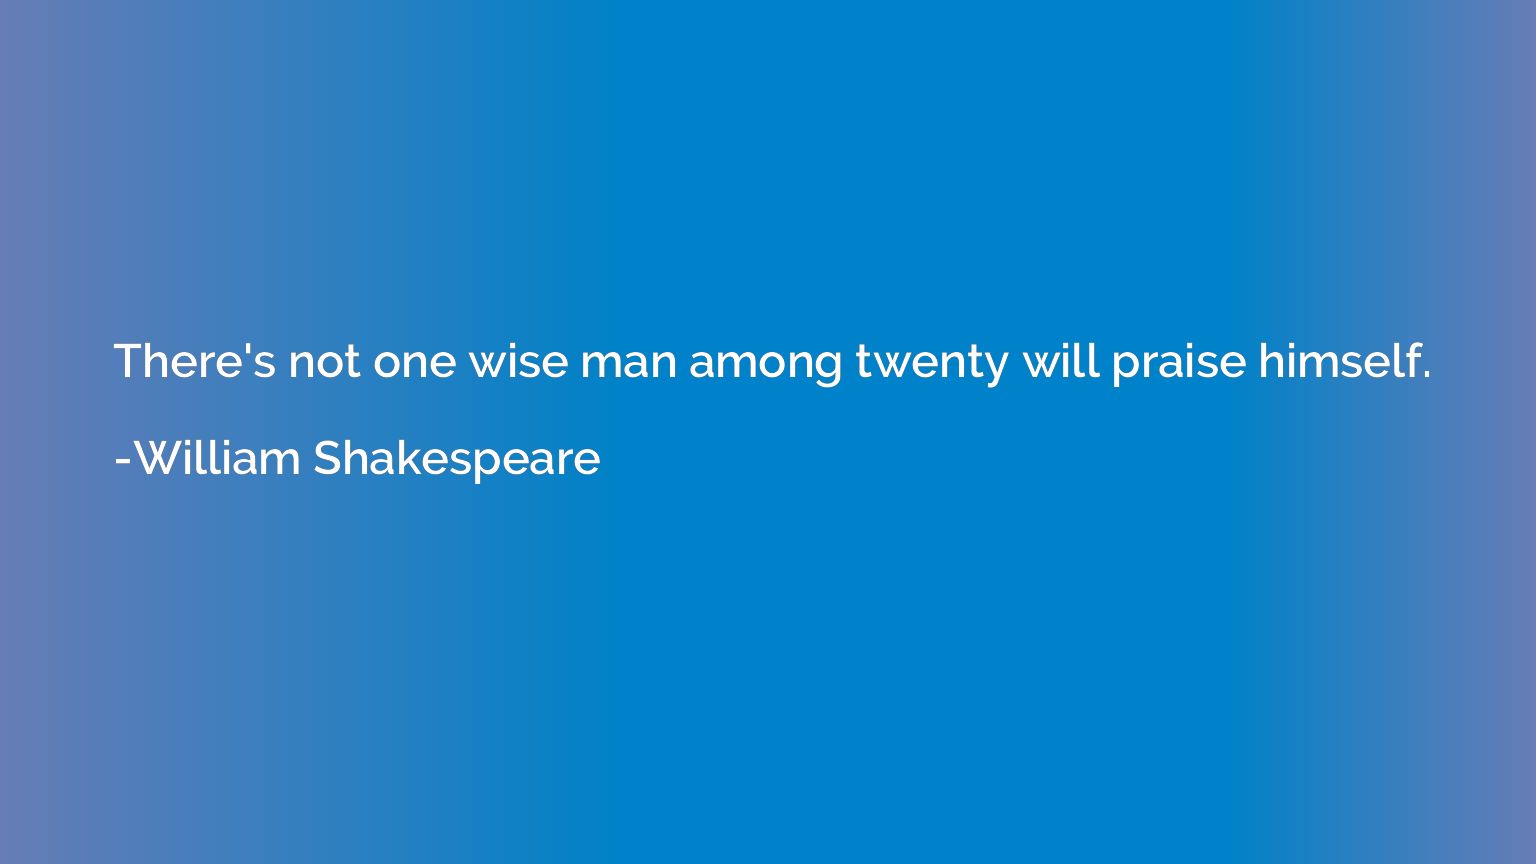 There's not one wise man among twenty will praise himself.